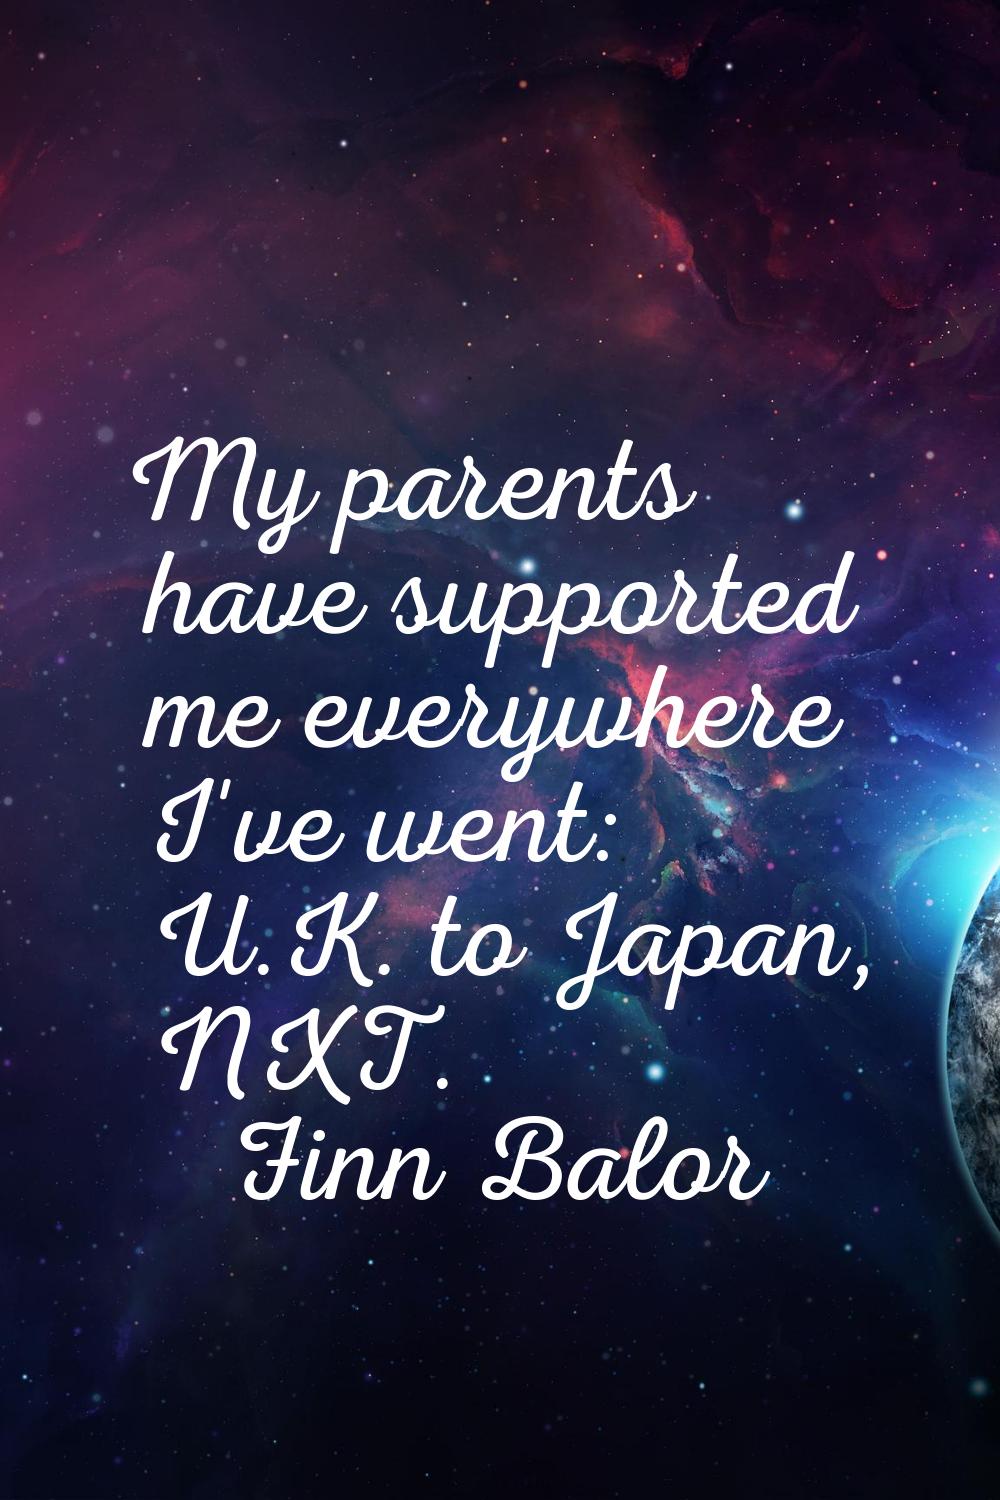 My parents have supported me everywhere I've went: U.K. to Japan, NXT.